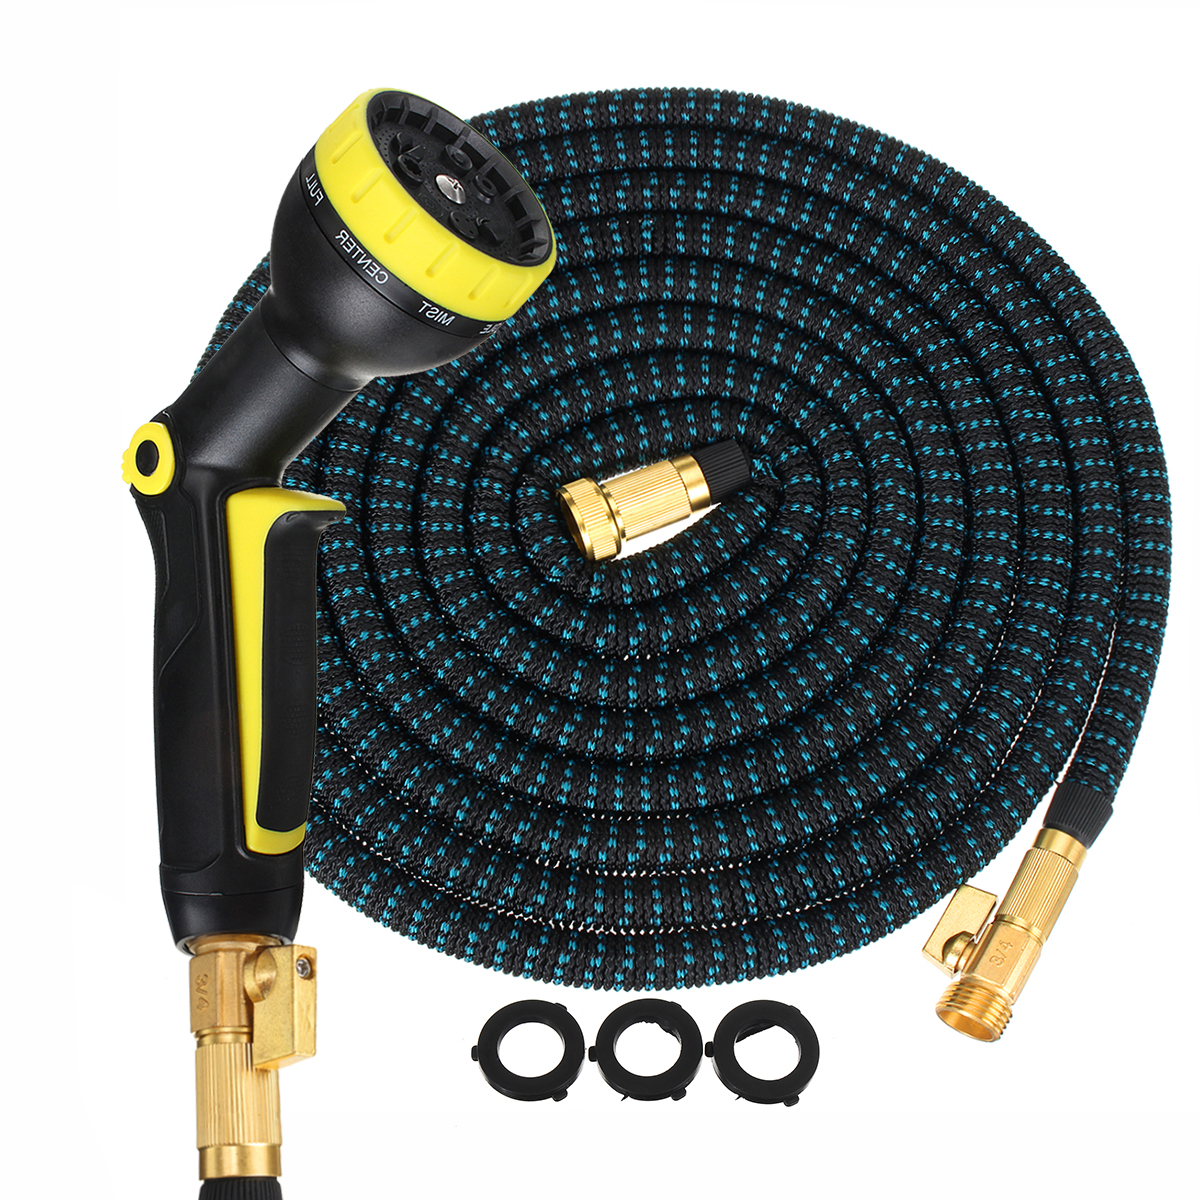 

25FT/50FT Full Copper High Pressure Car Washing Telescopic Water Pipe Spray Nozzle Set Household 3 Times Expandable Hose